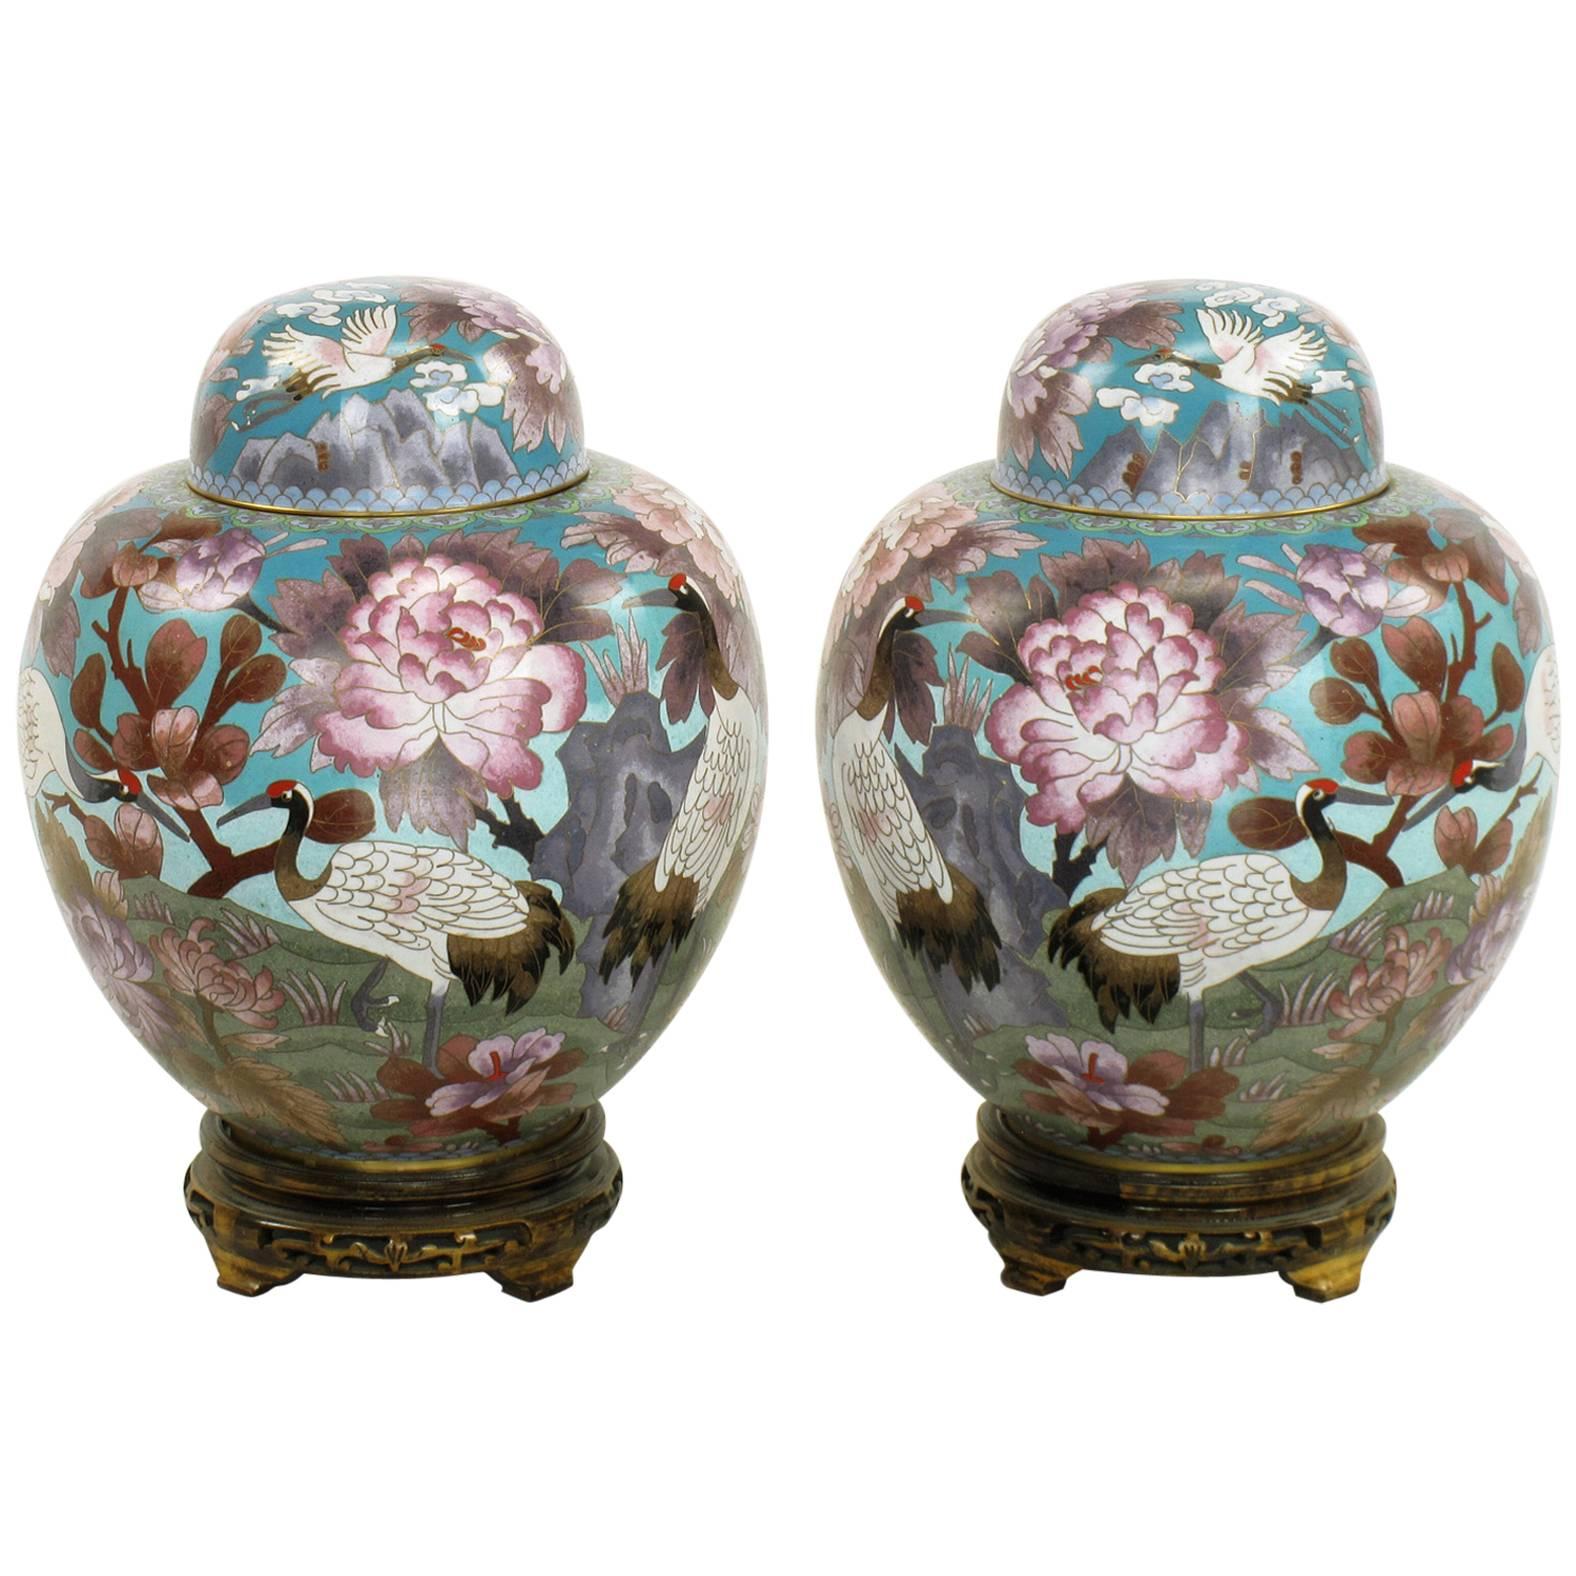 Pair of Chinese Cloisonné Urns with Red-Crowned Cranes and Peonies For Sale